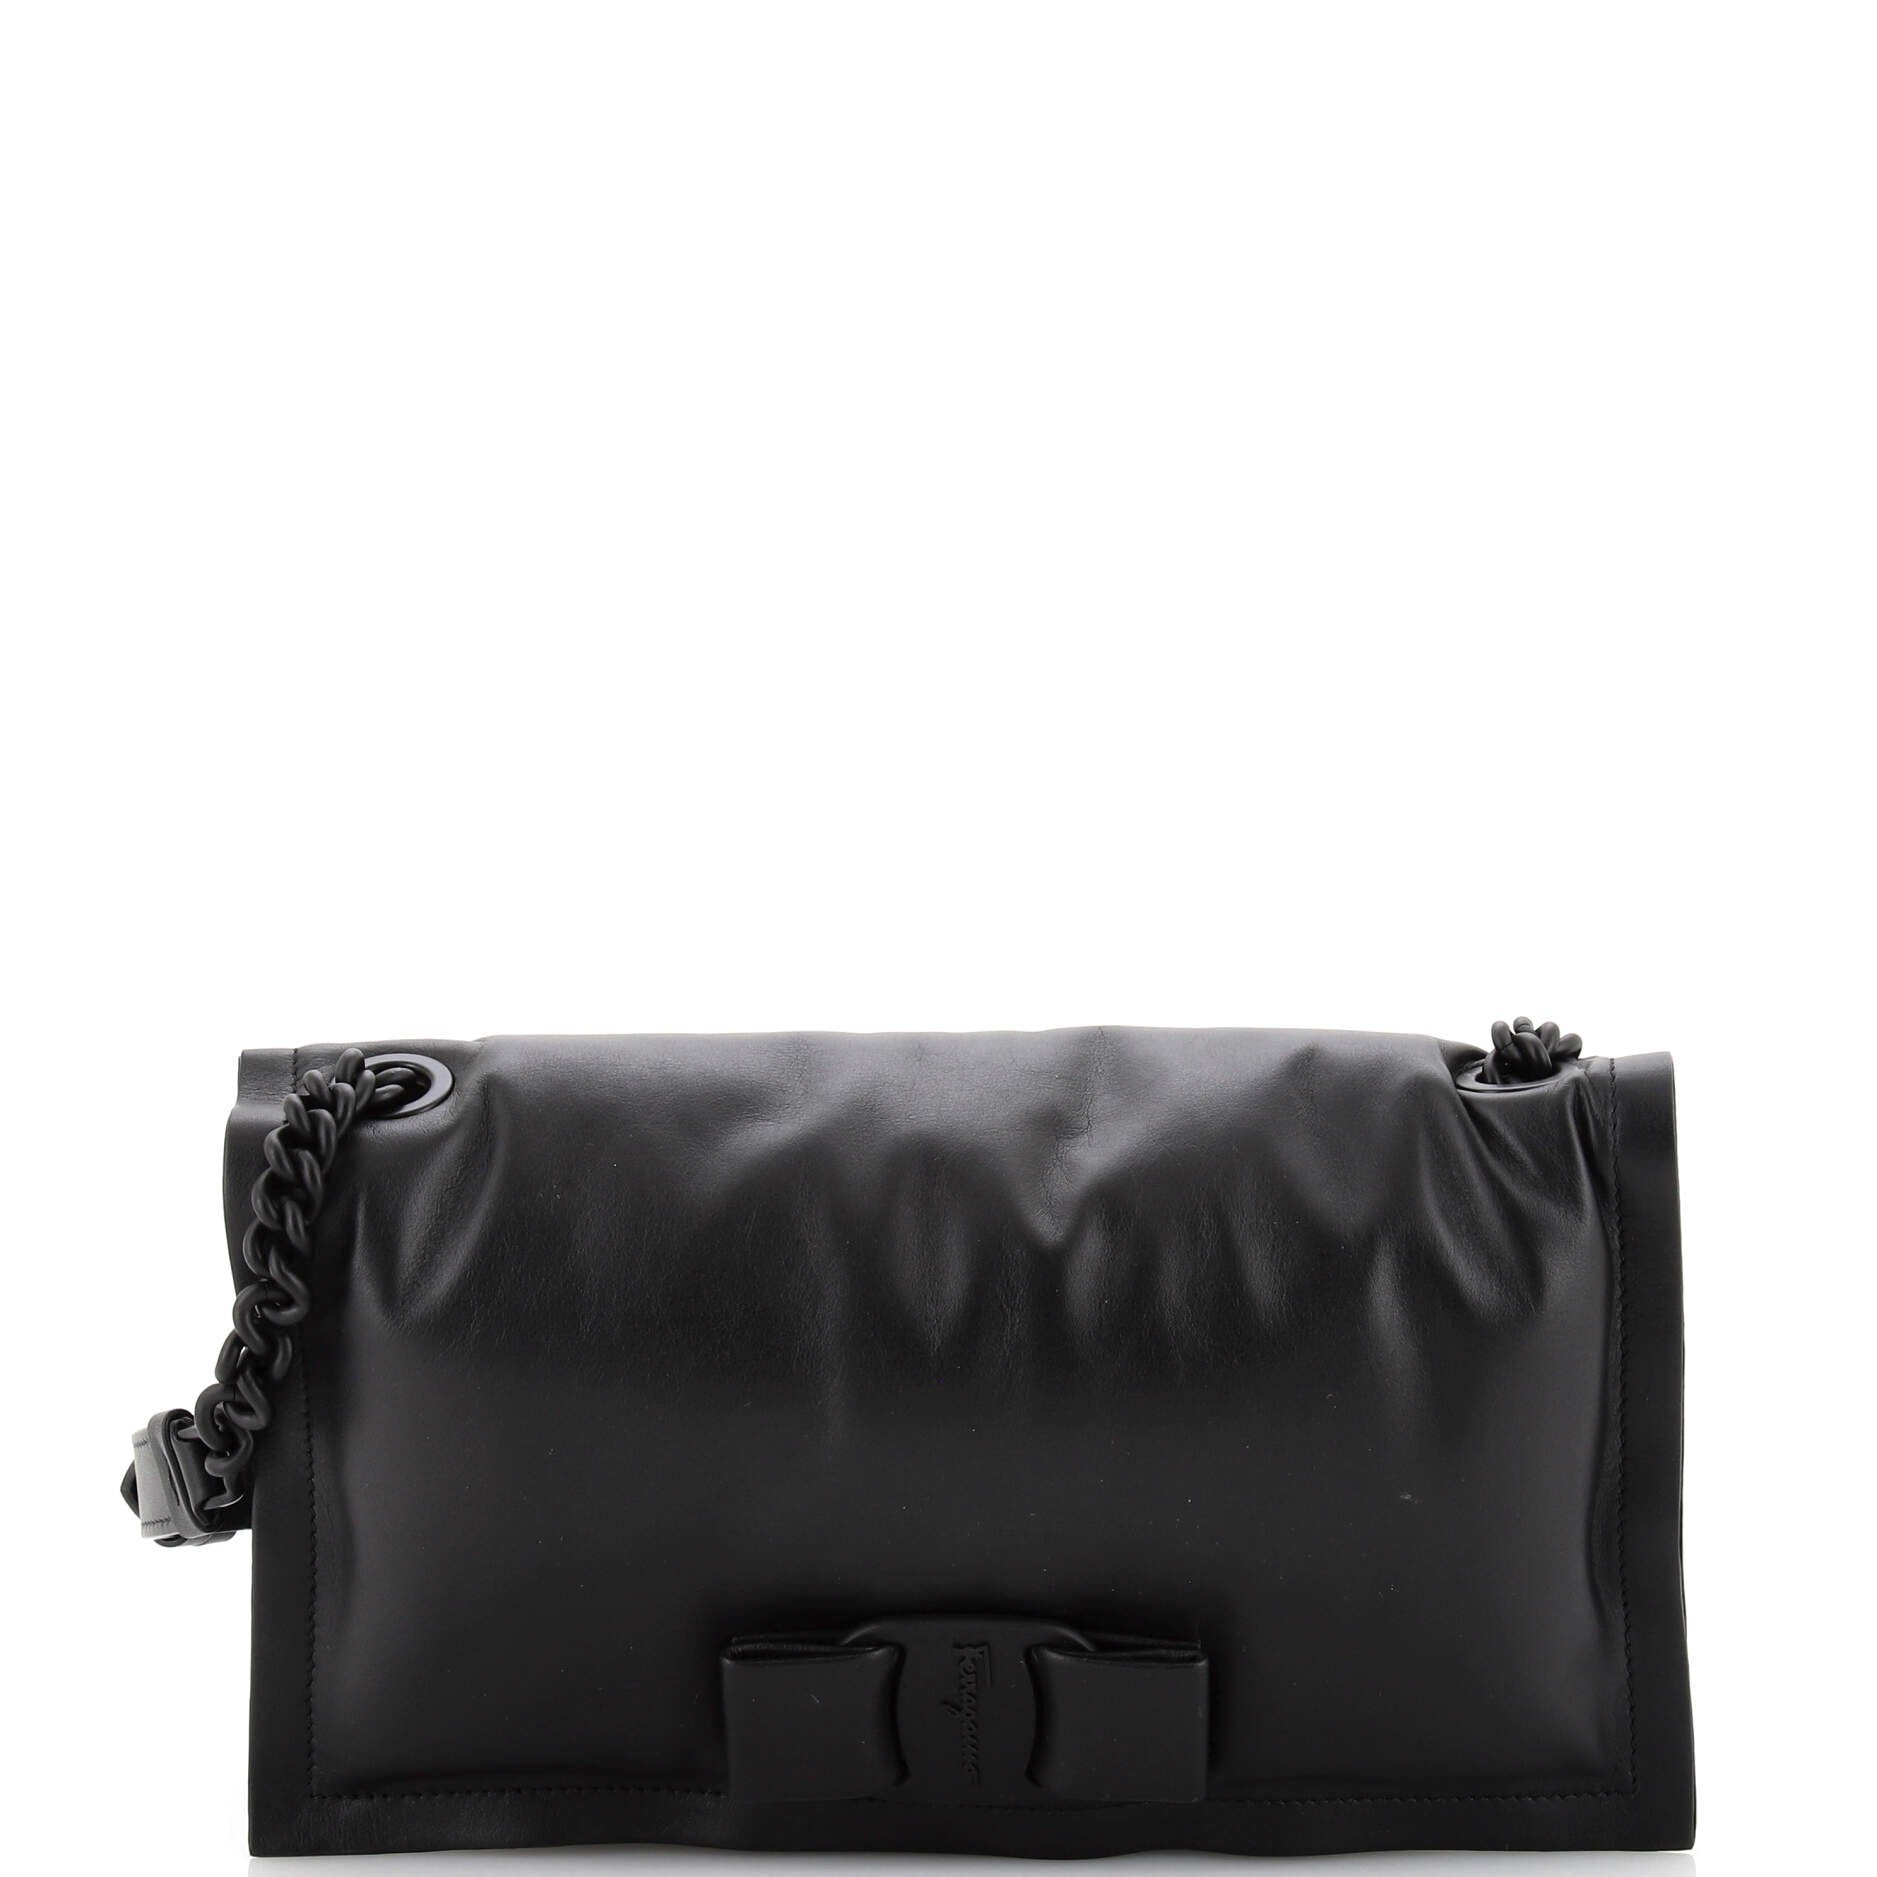 Viva Bow Flap Bag Leather Small